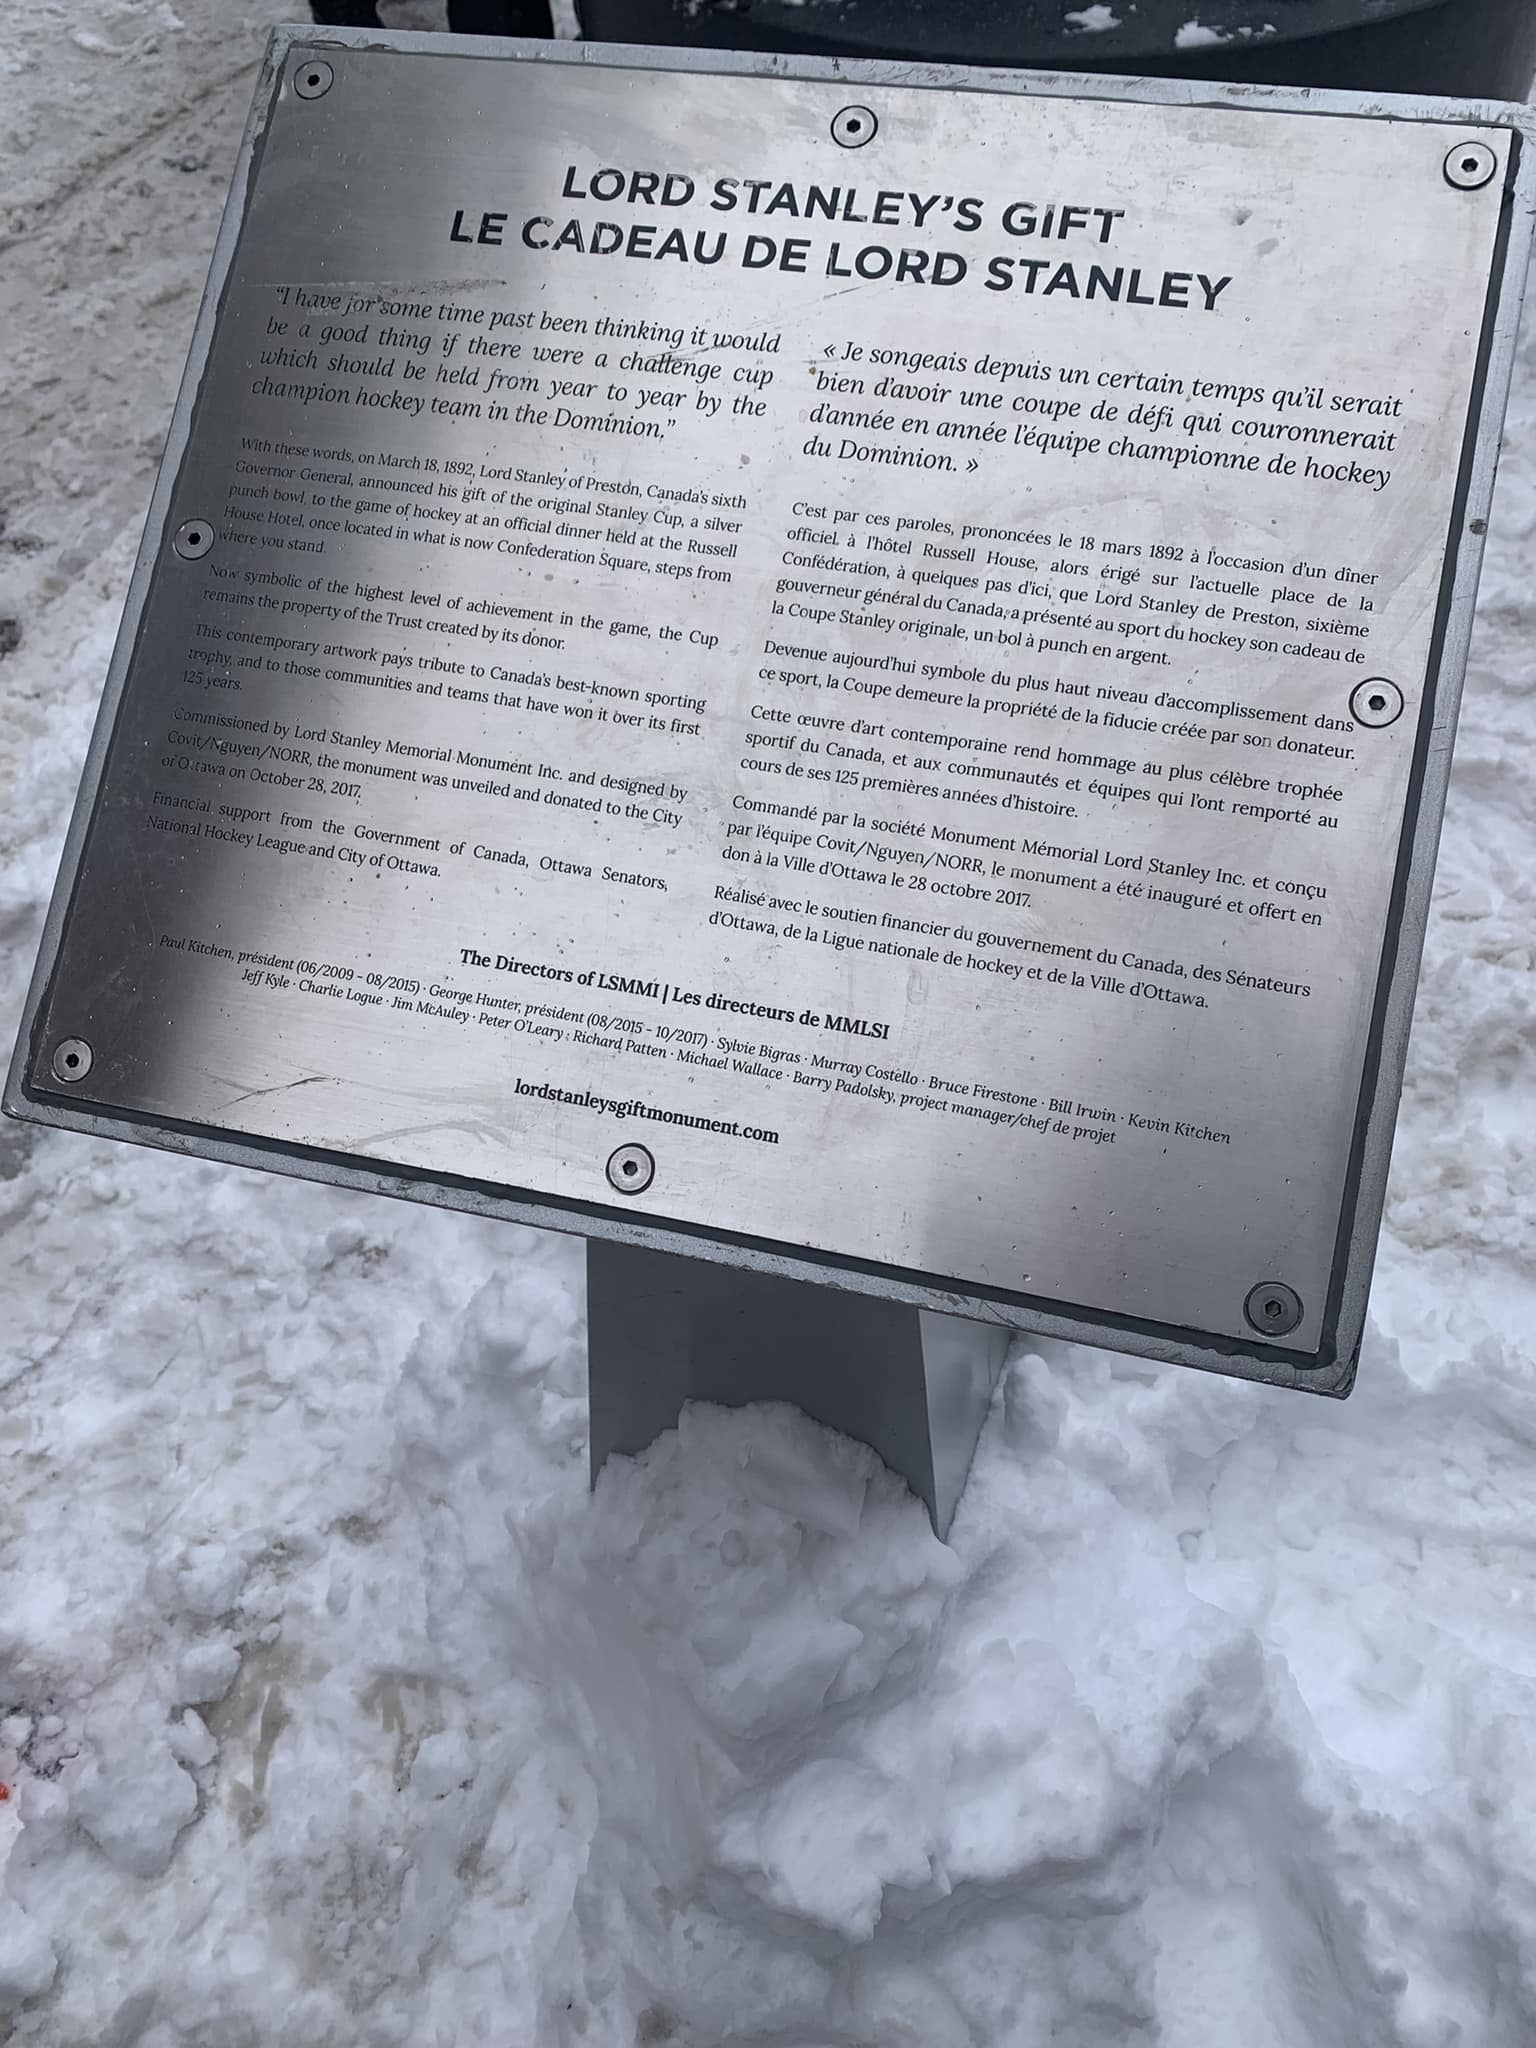 https://705blackfly.com/wp-content/uploads/2023/03/LORD-STANLEY-PIC-1.jpg